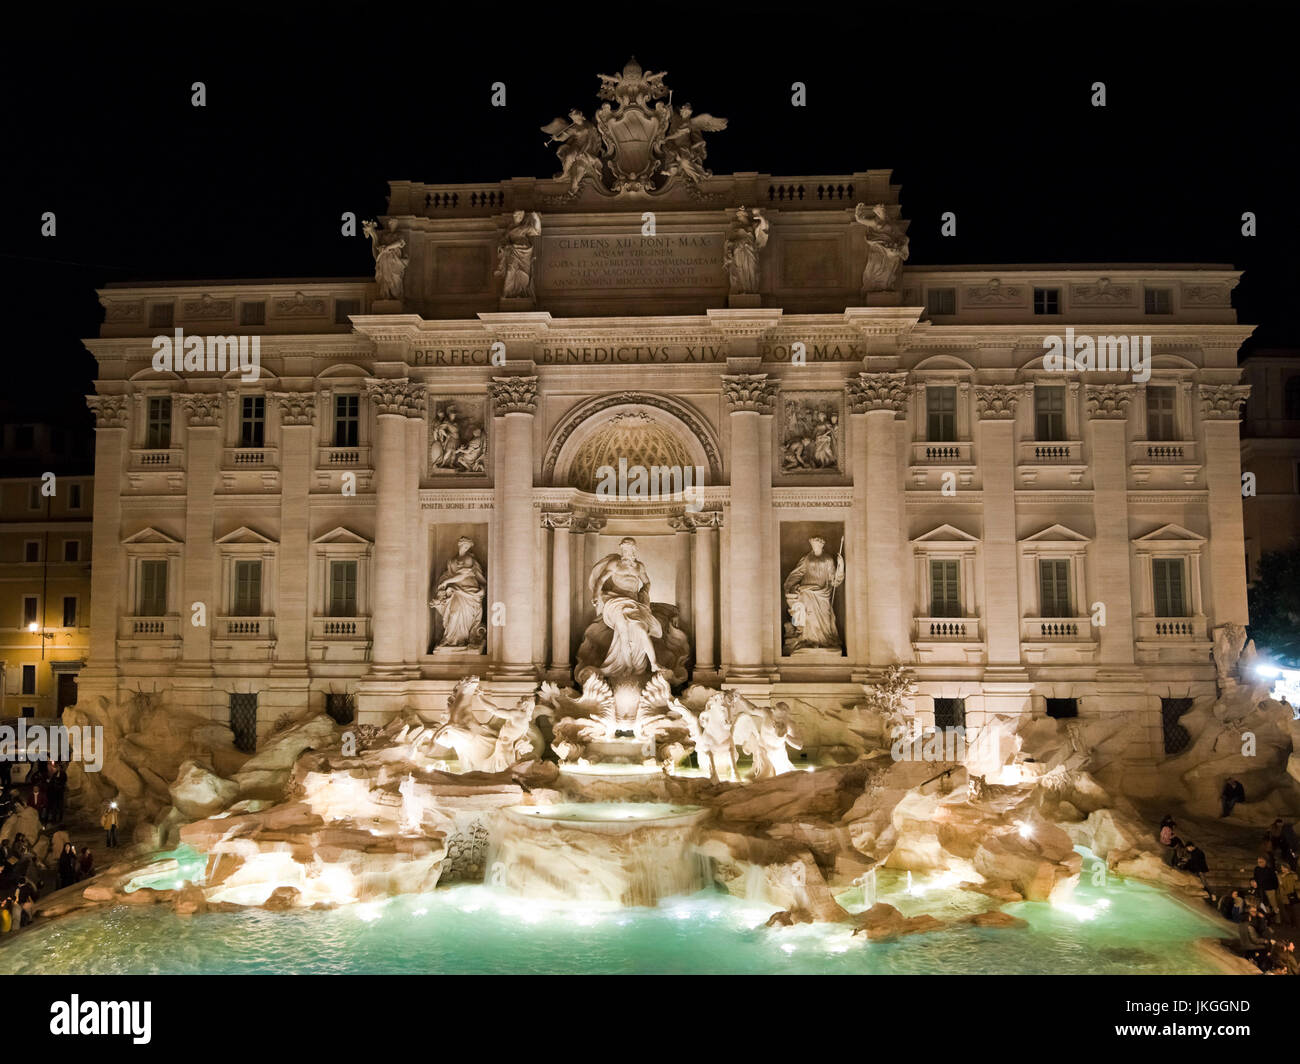 Horizontal nighttime view of the Trevi Fountain in Rome. Stock Photo